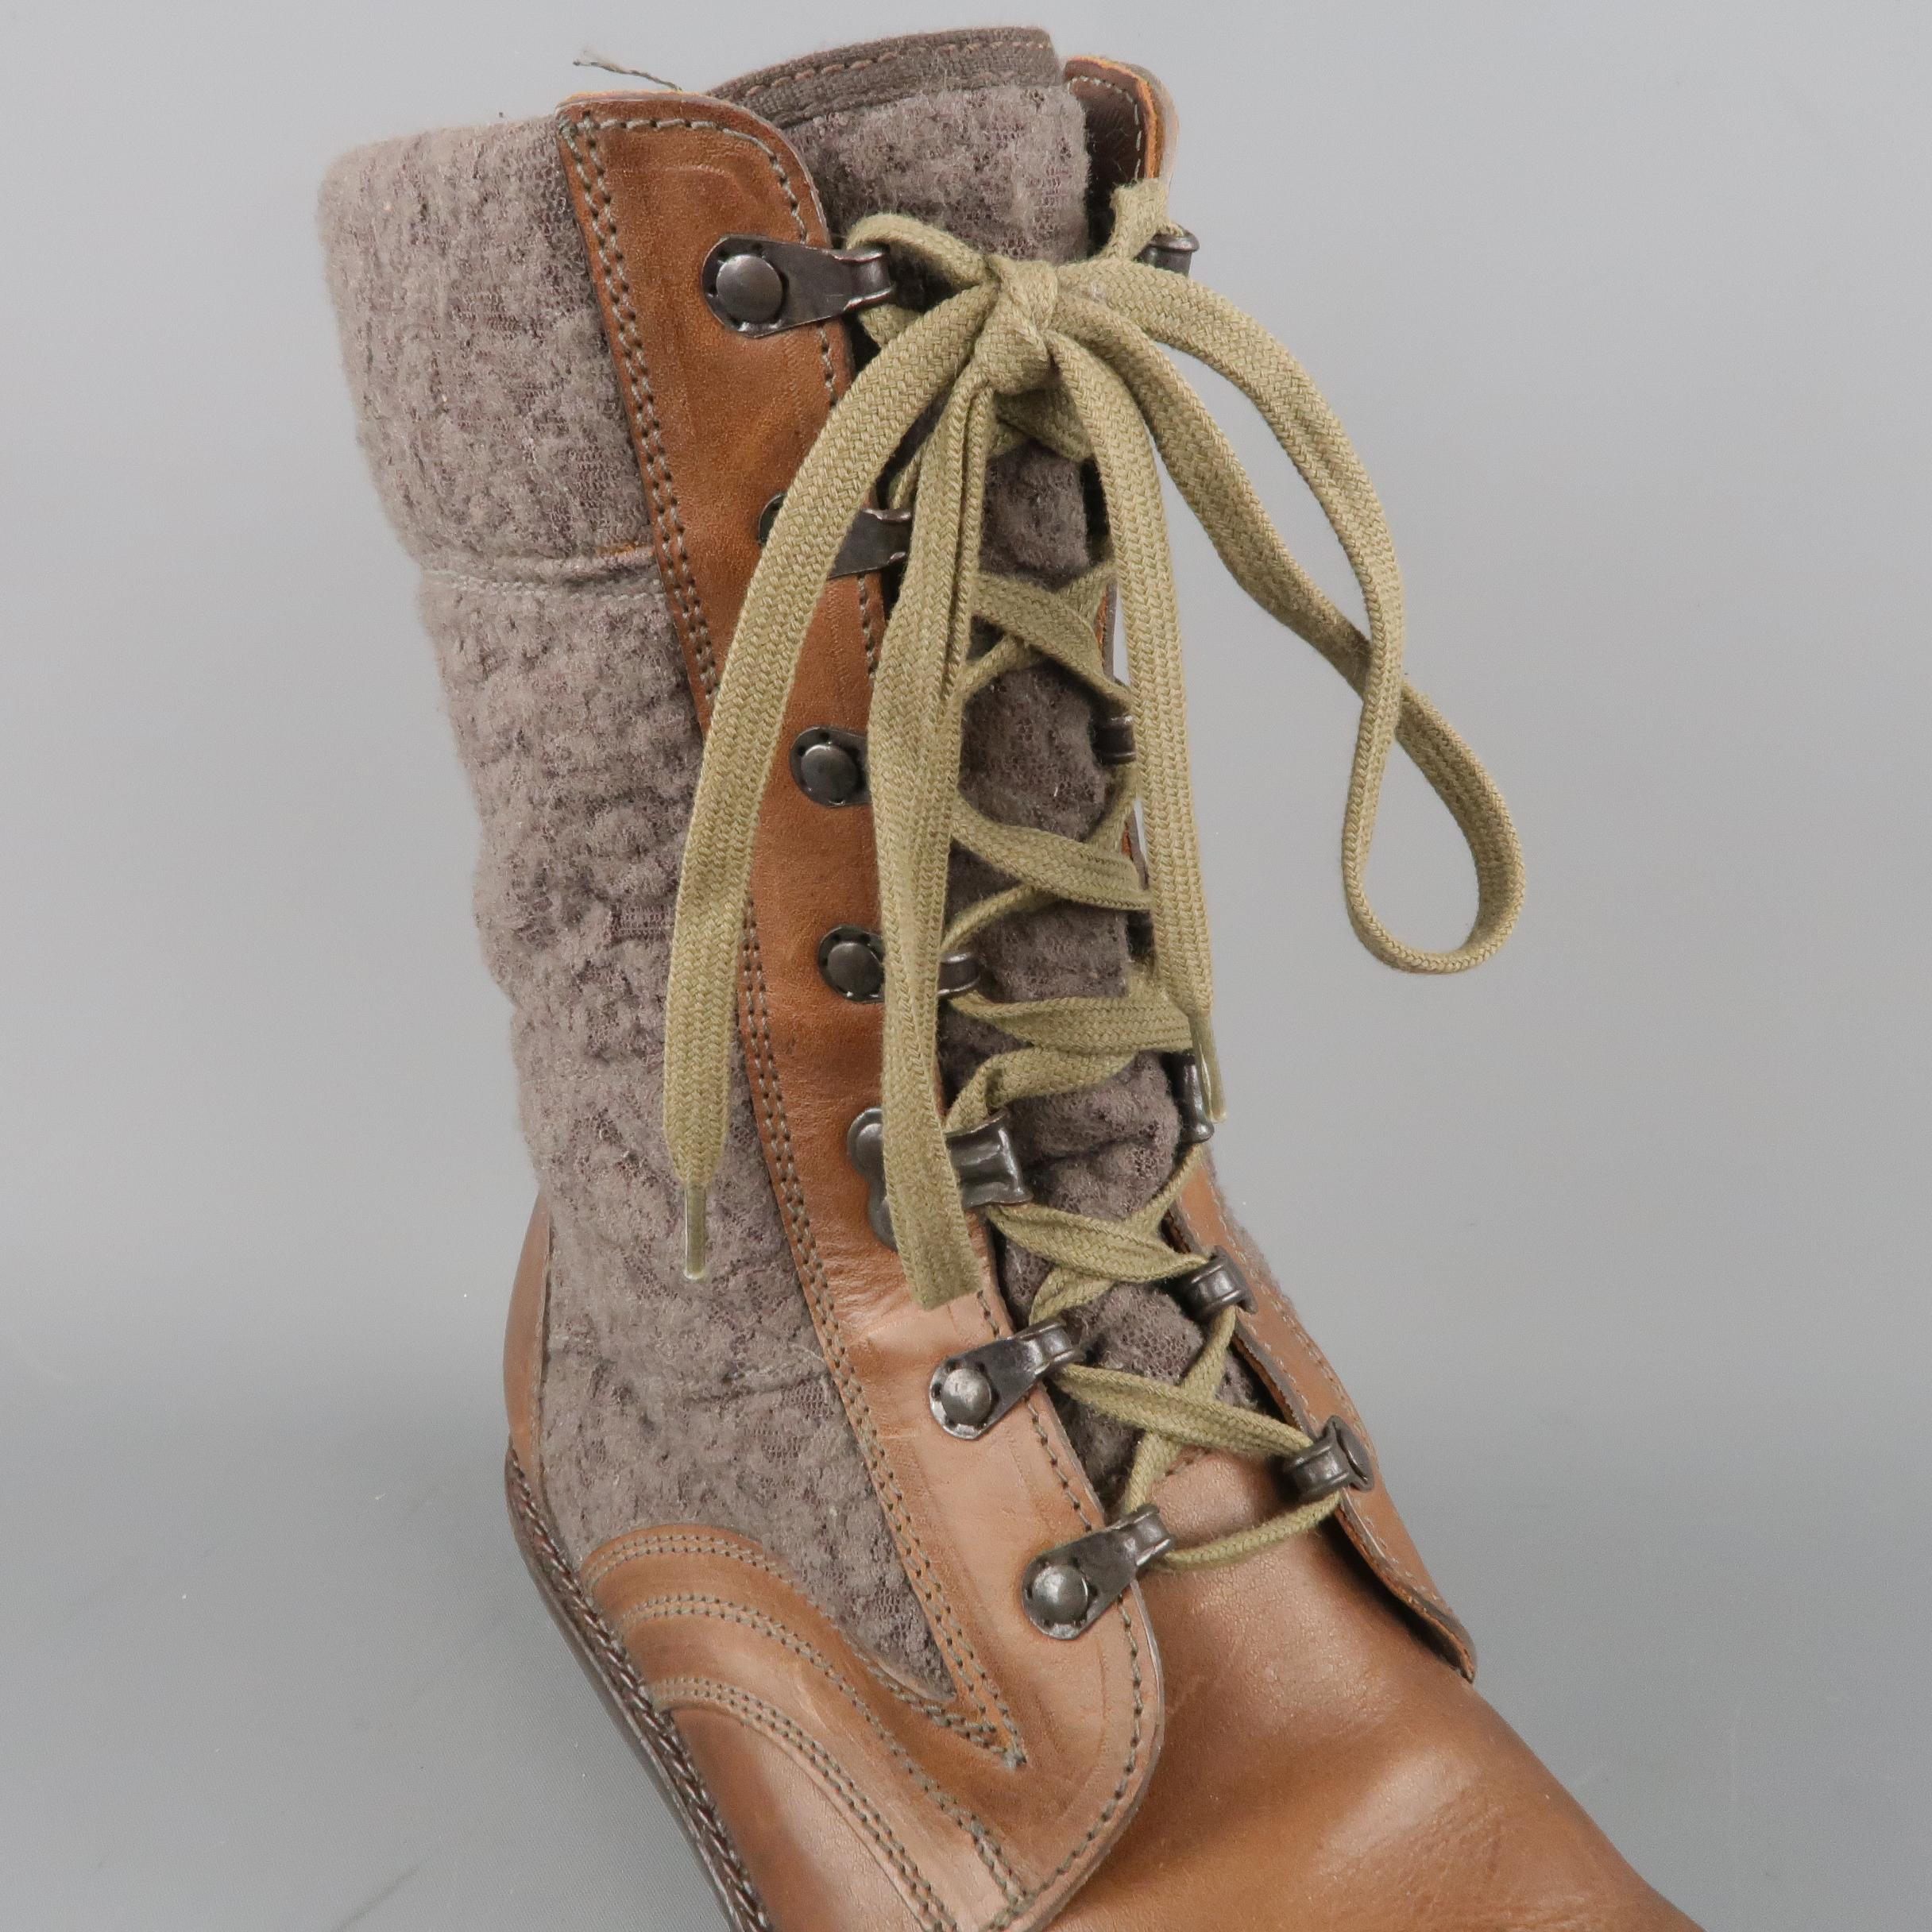 LANVIN fashion ski boots come in tan brown leather with dark metal ski hook lace up front, chunky sole, and gray textured lace shaft panel. Made in Italy.
 
Very Good Pre-Owned Condition.
Marked:
 
Measurements:
 
Length: 11.5 in.
Width: 4